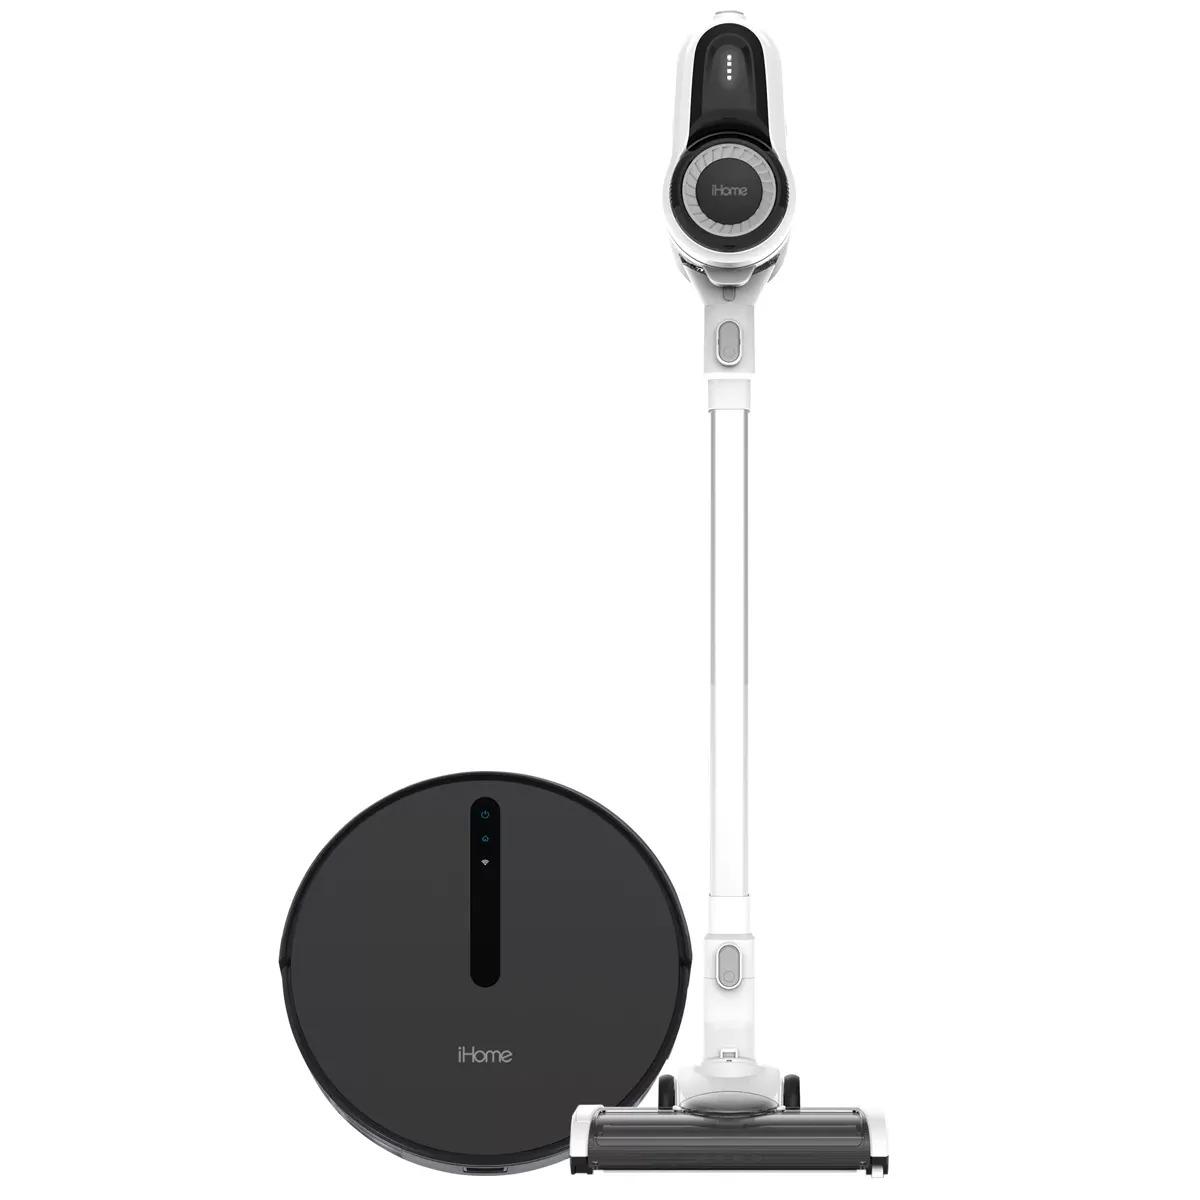 iHome 3-in-1 StickVac with AutoVac Robot Vacuum for $149 Shipped